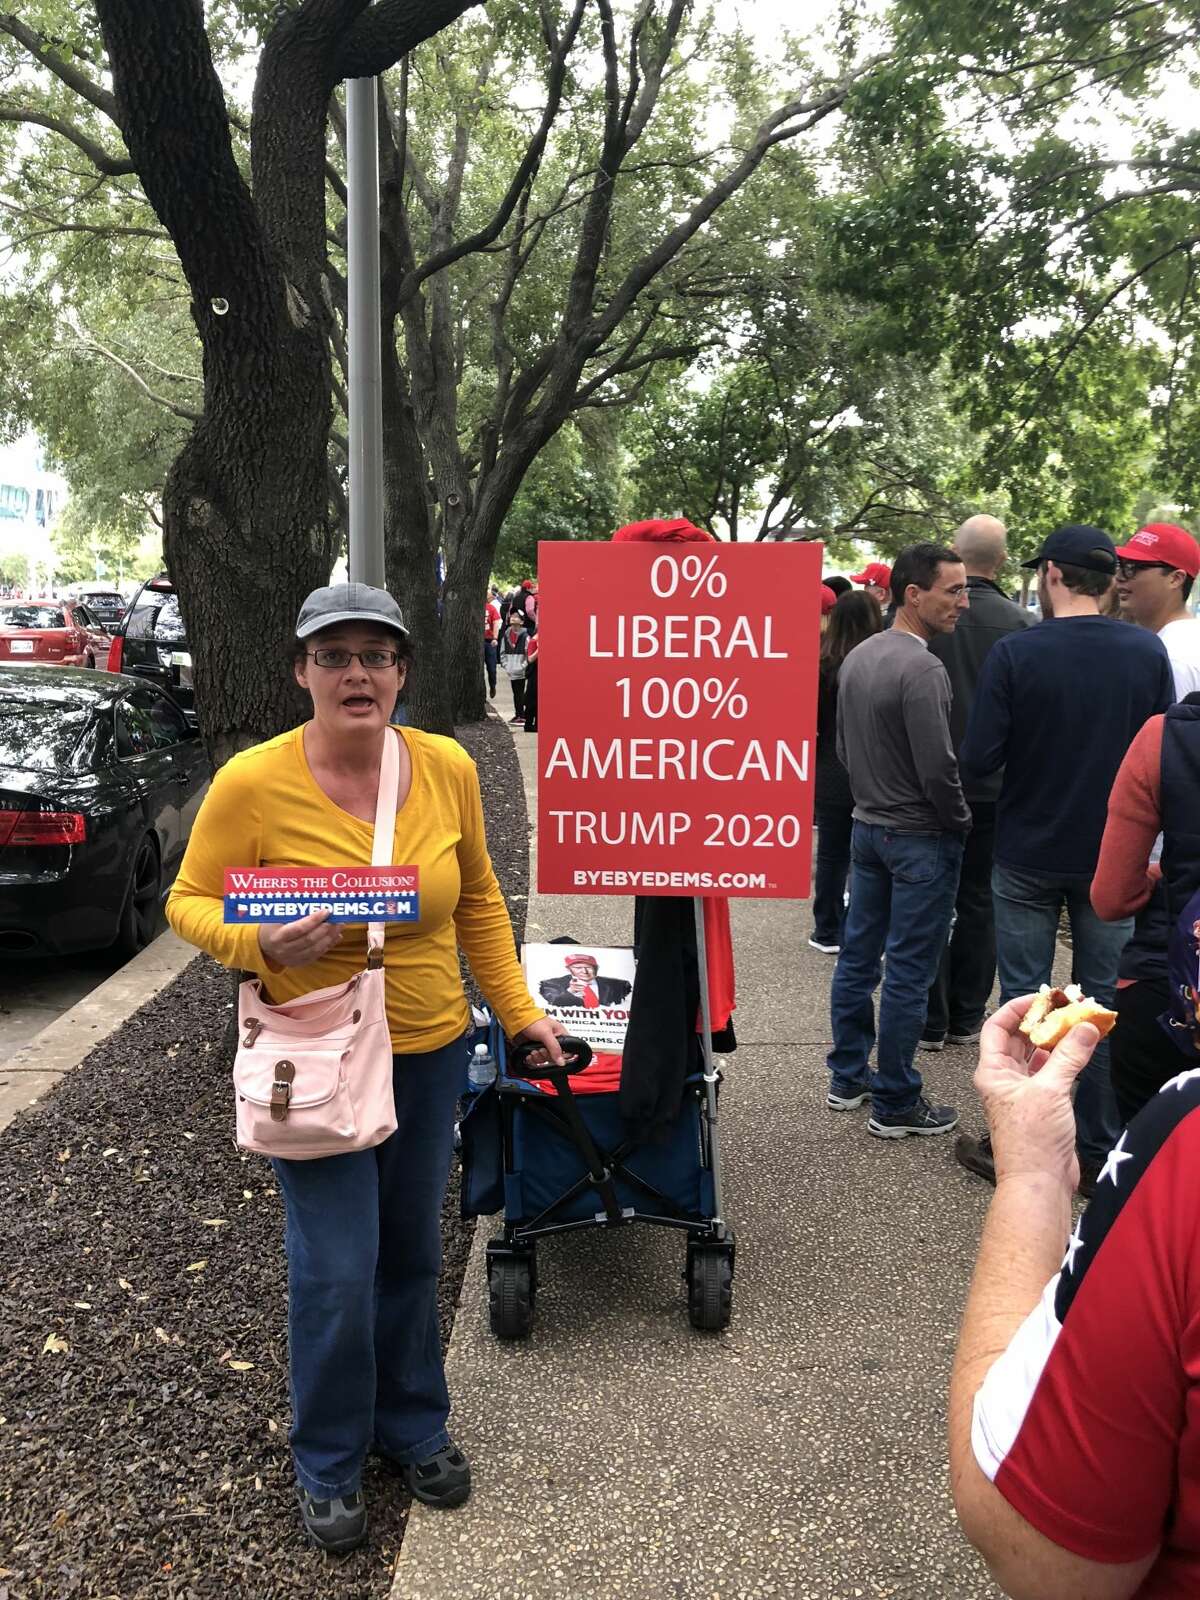 Vendors advertised anti-liberal messages as they snaked around the enormous lines on Monday. 